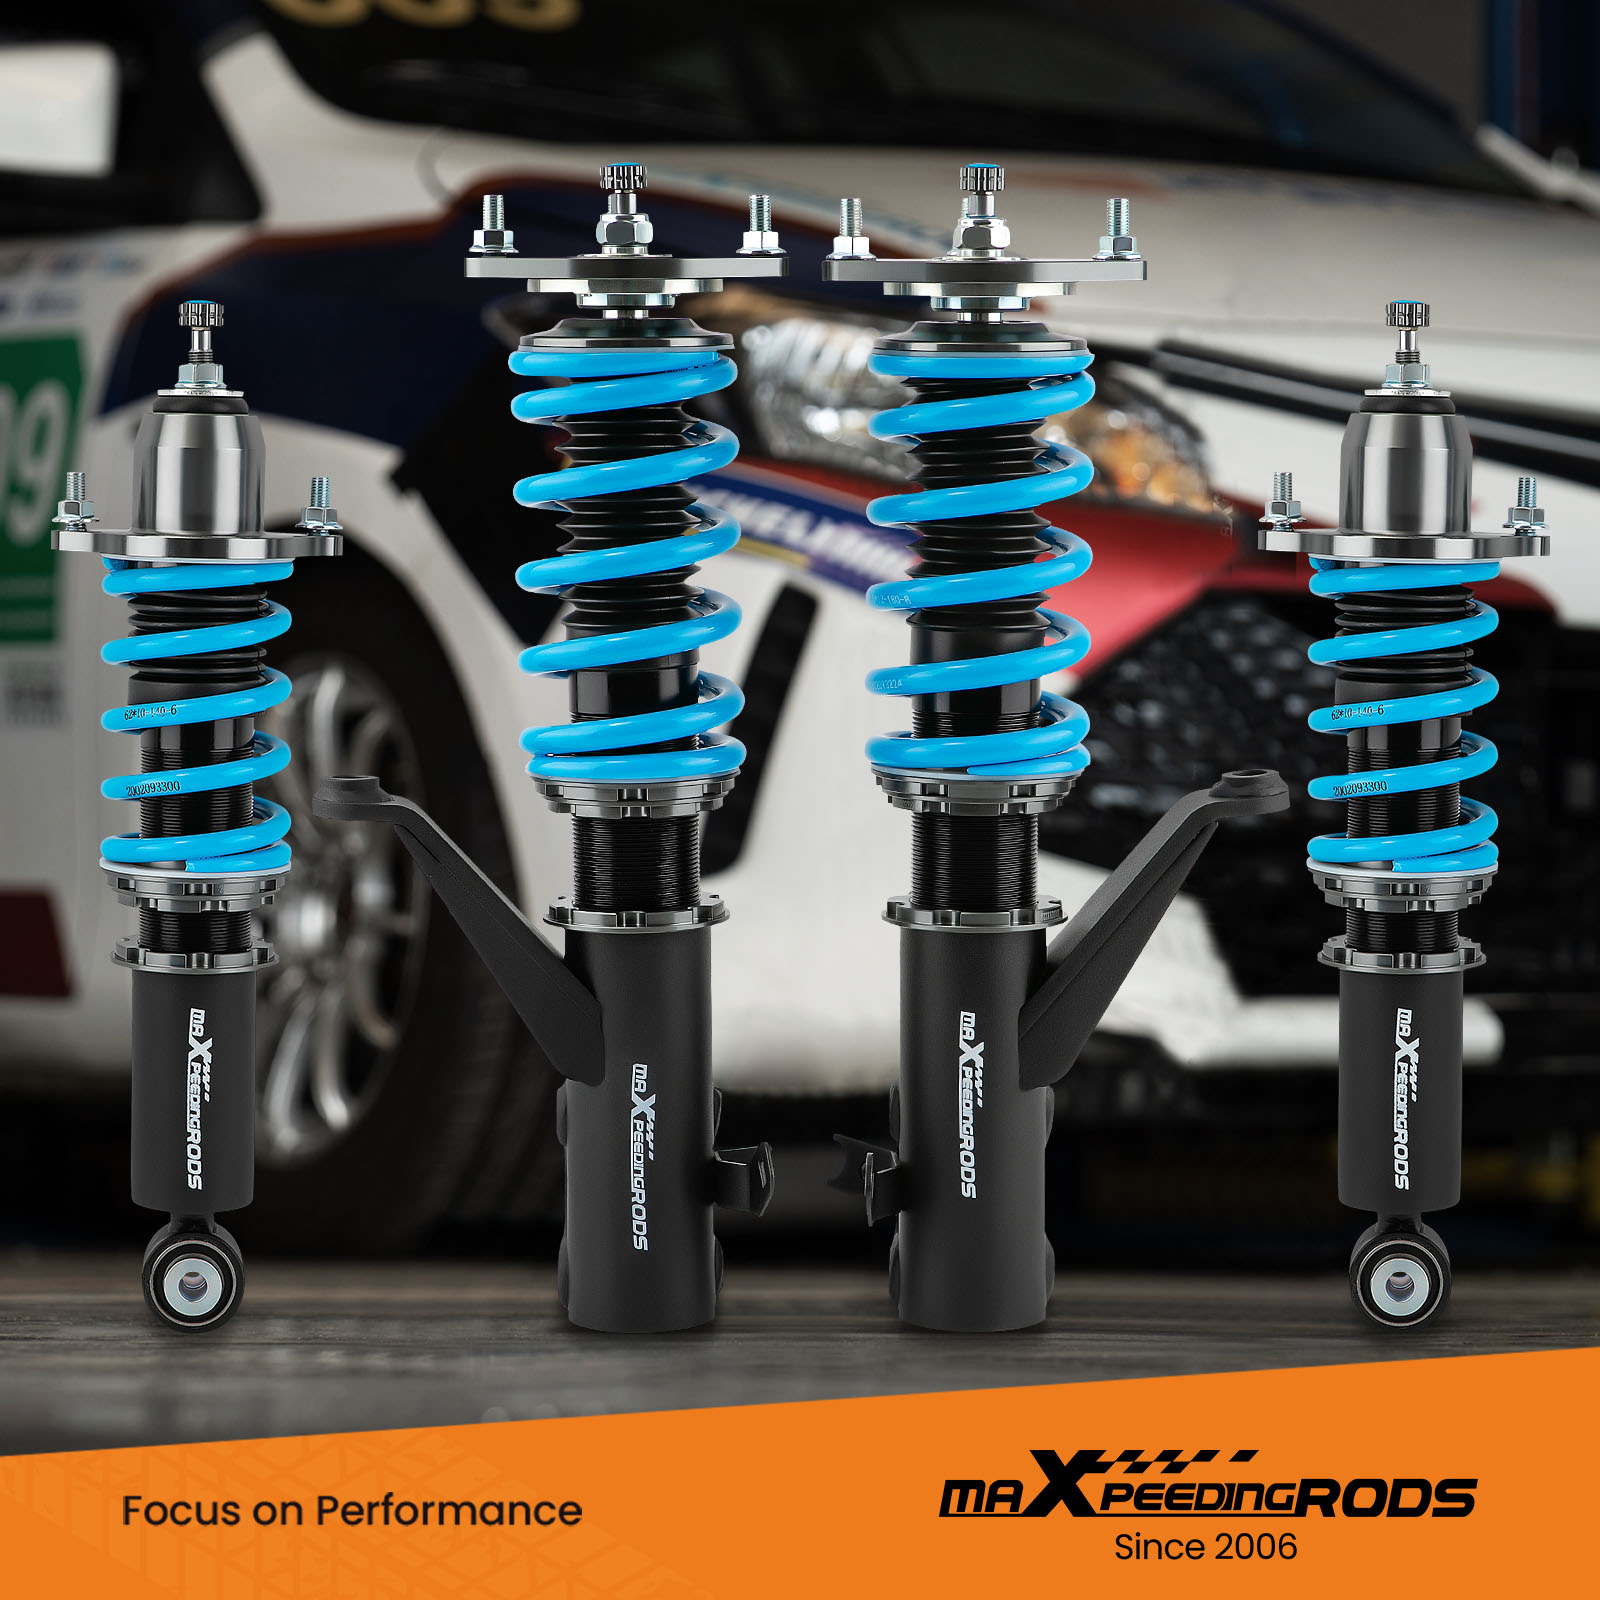 MaXpeedingRods Blog | An Automotive Blog from MaXpeedingRods - The Reason Why You Should Choose T6 for Your Daily Drive